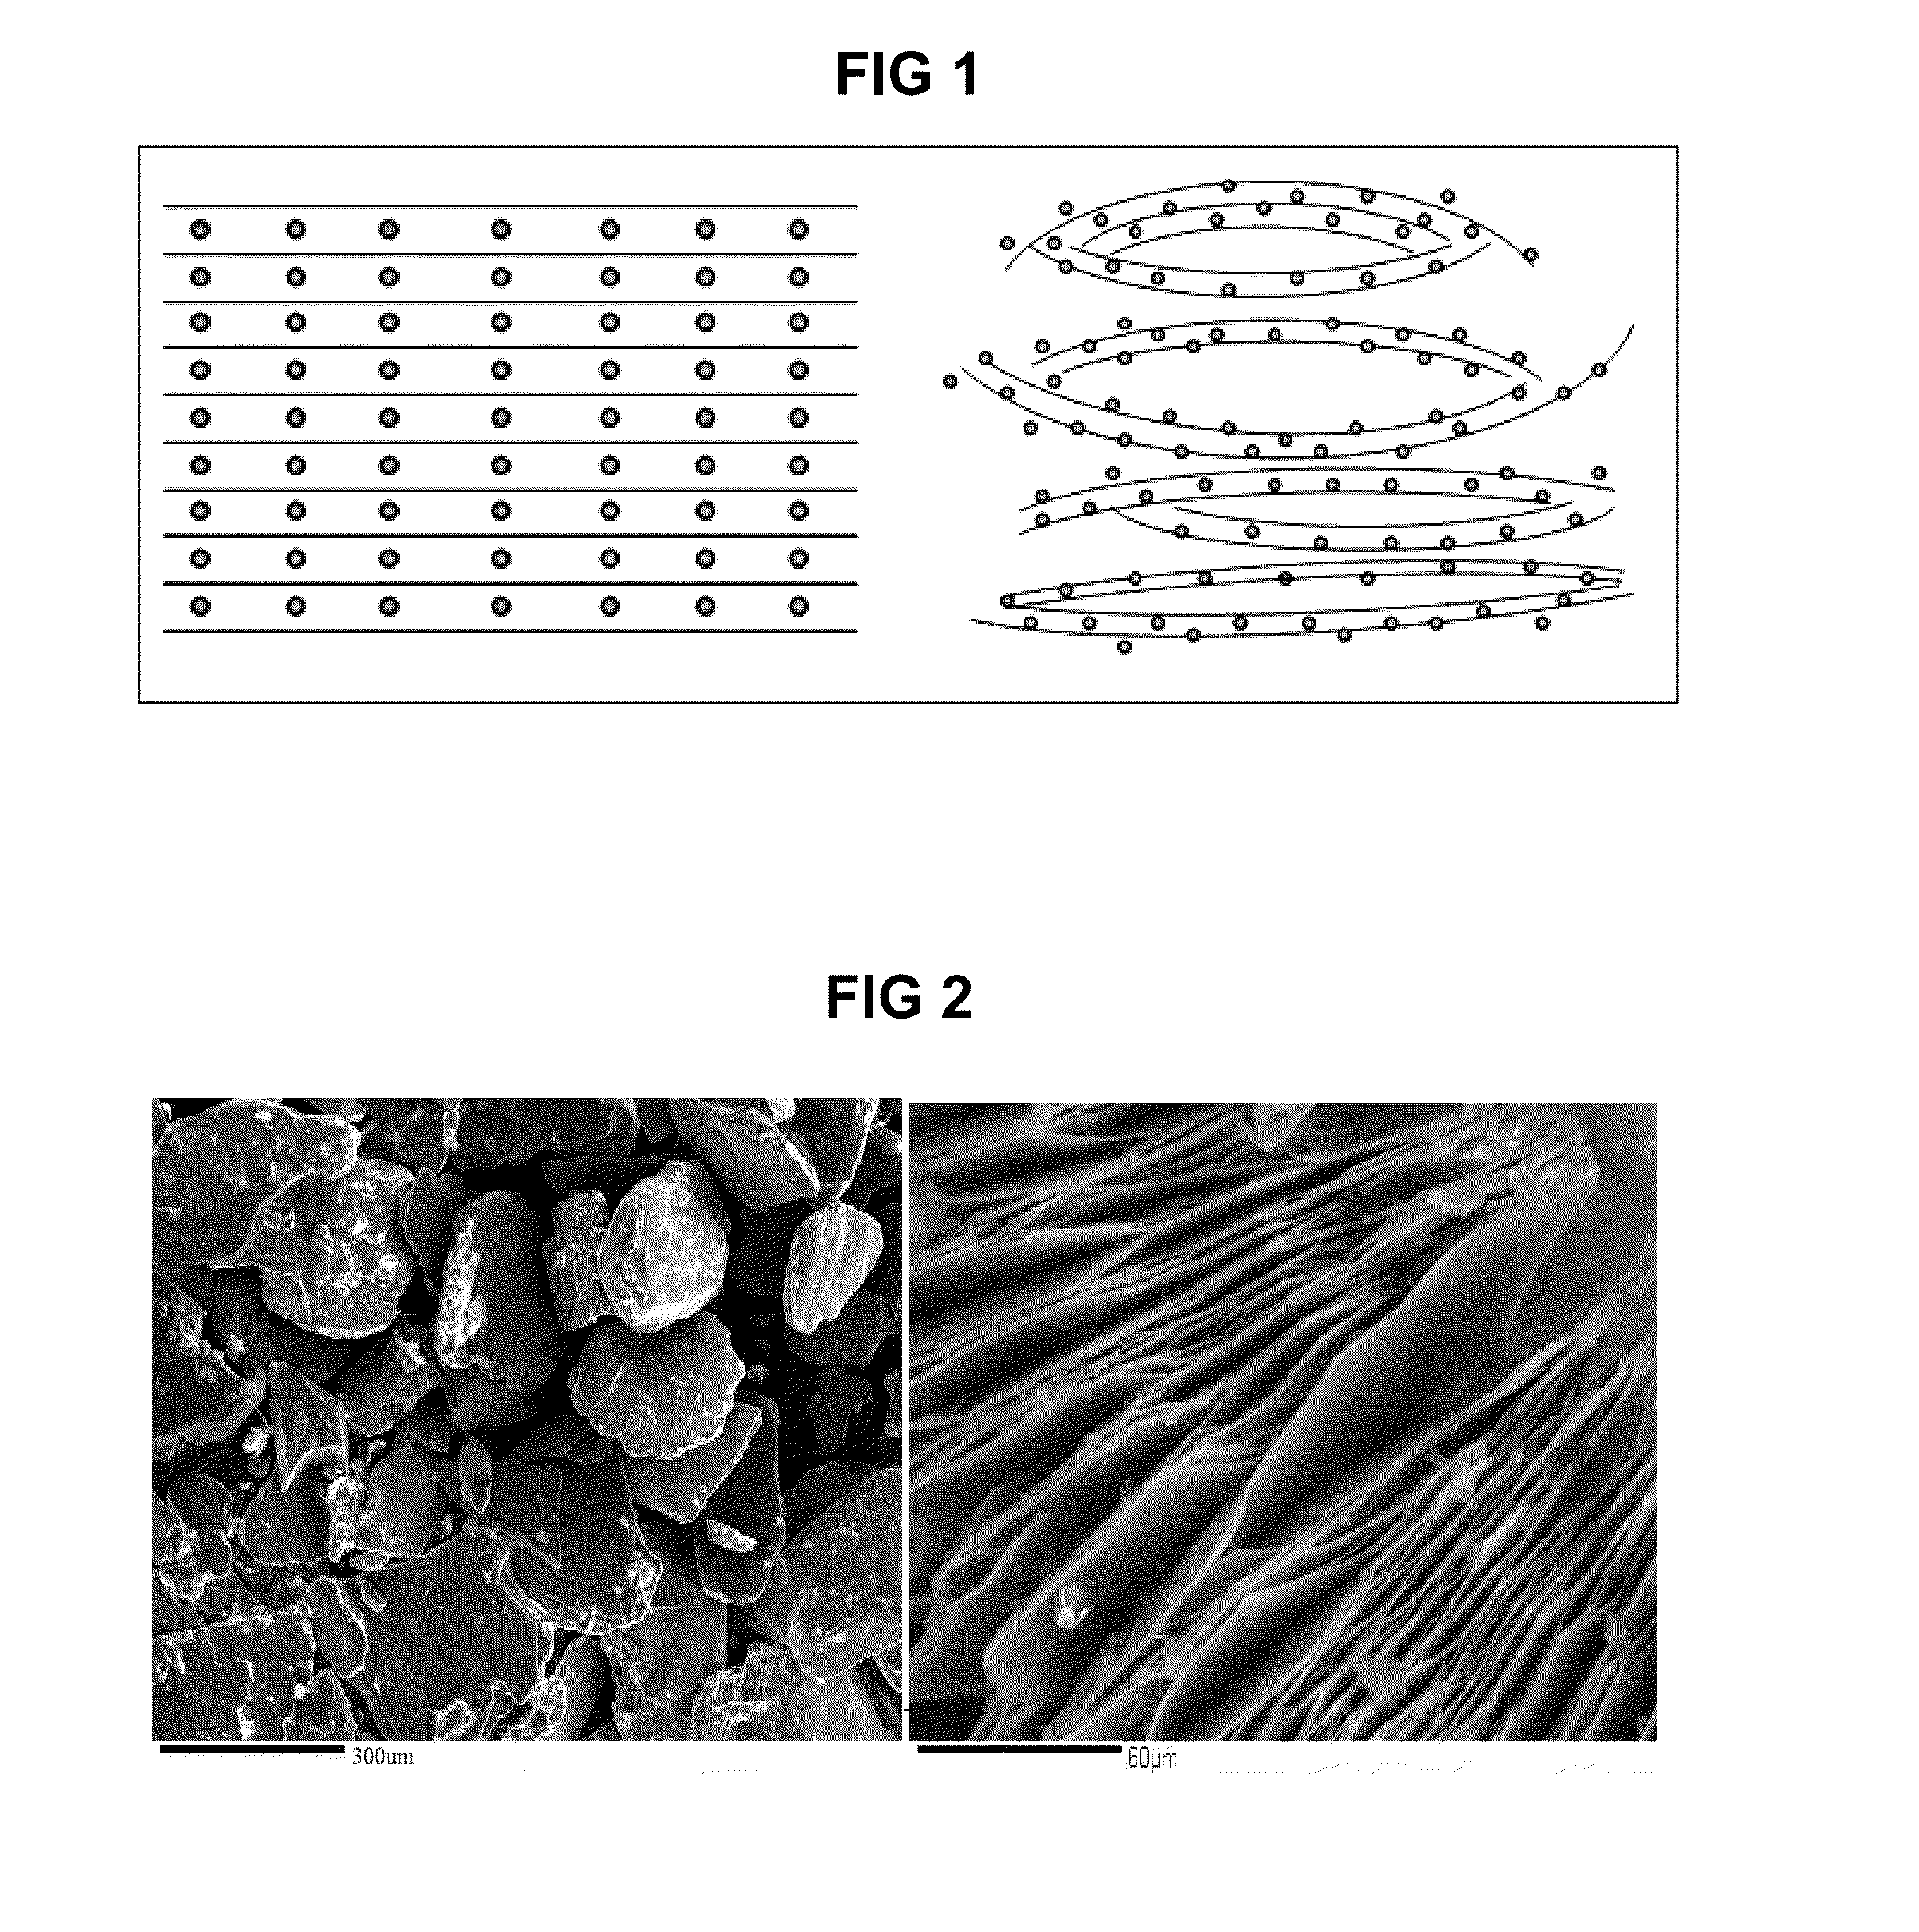 Antimicrobial Exfoliated Vermiculite Composite Material and Methods for Preparing the Same